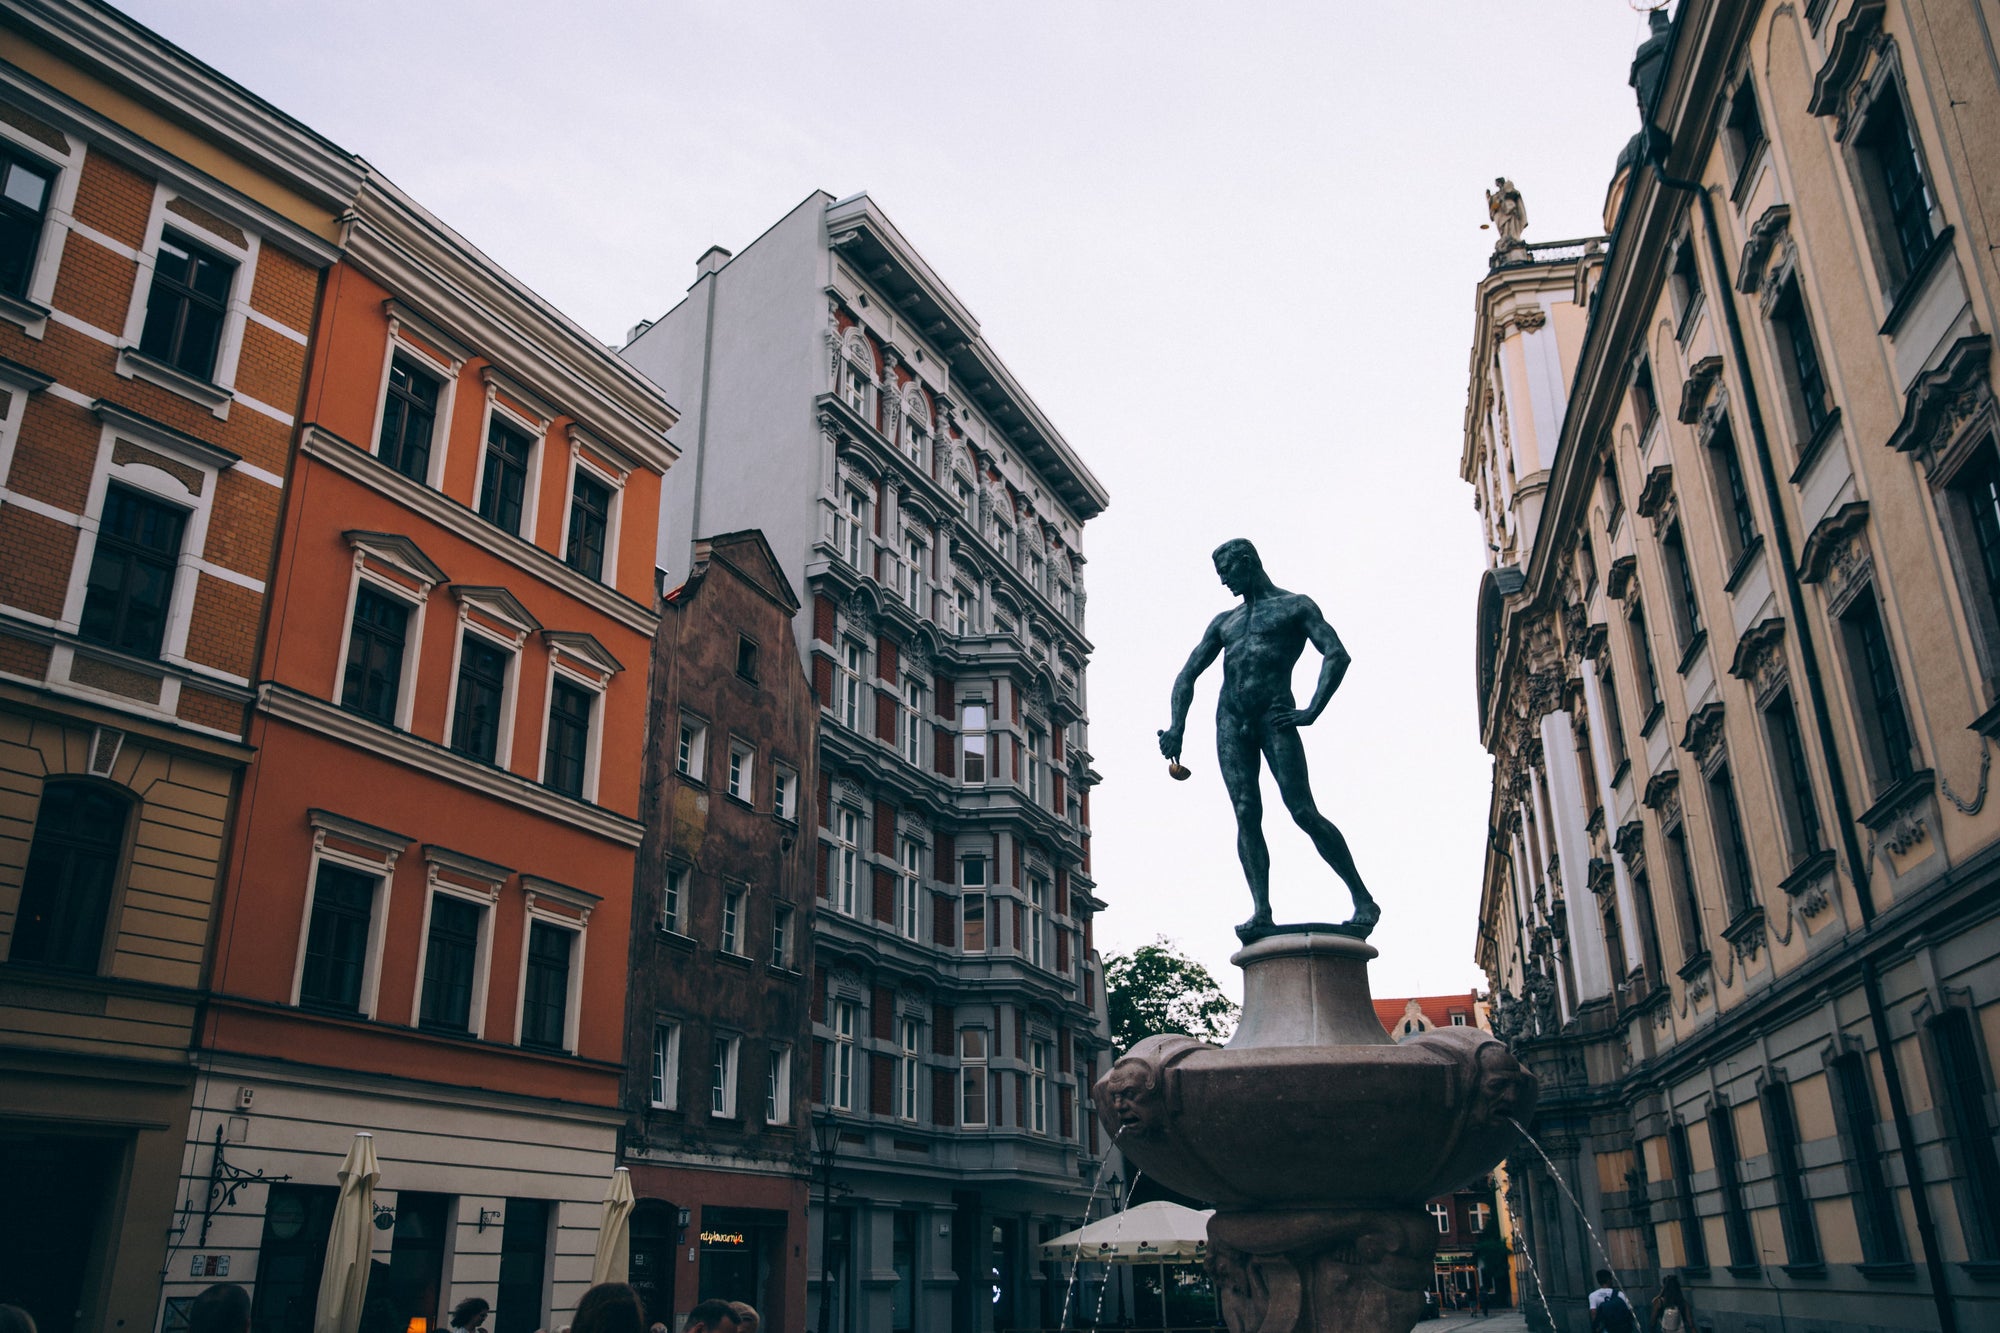 A statue of a man holding a ladle downtown in a city in Poland